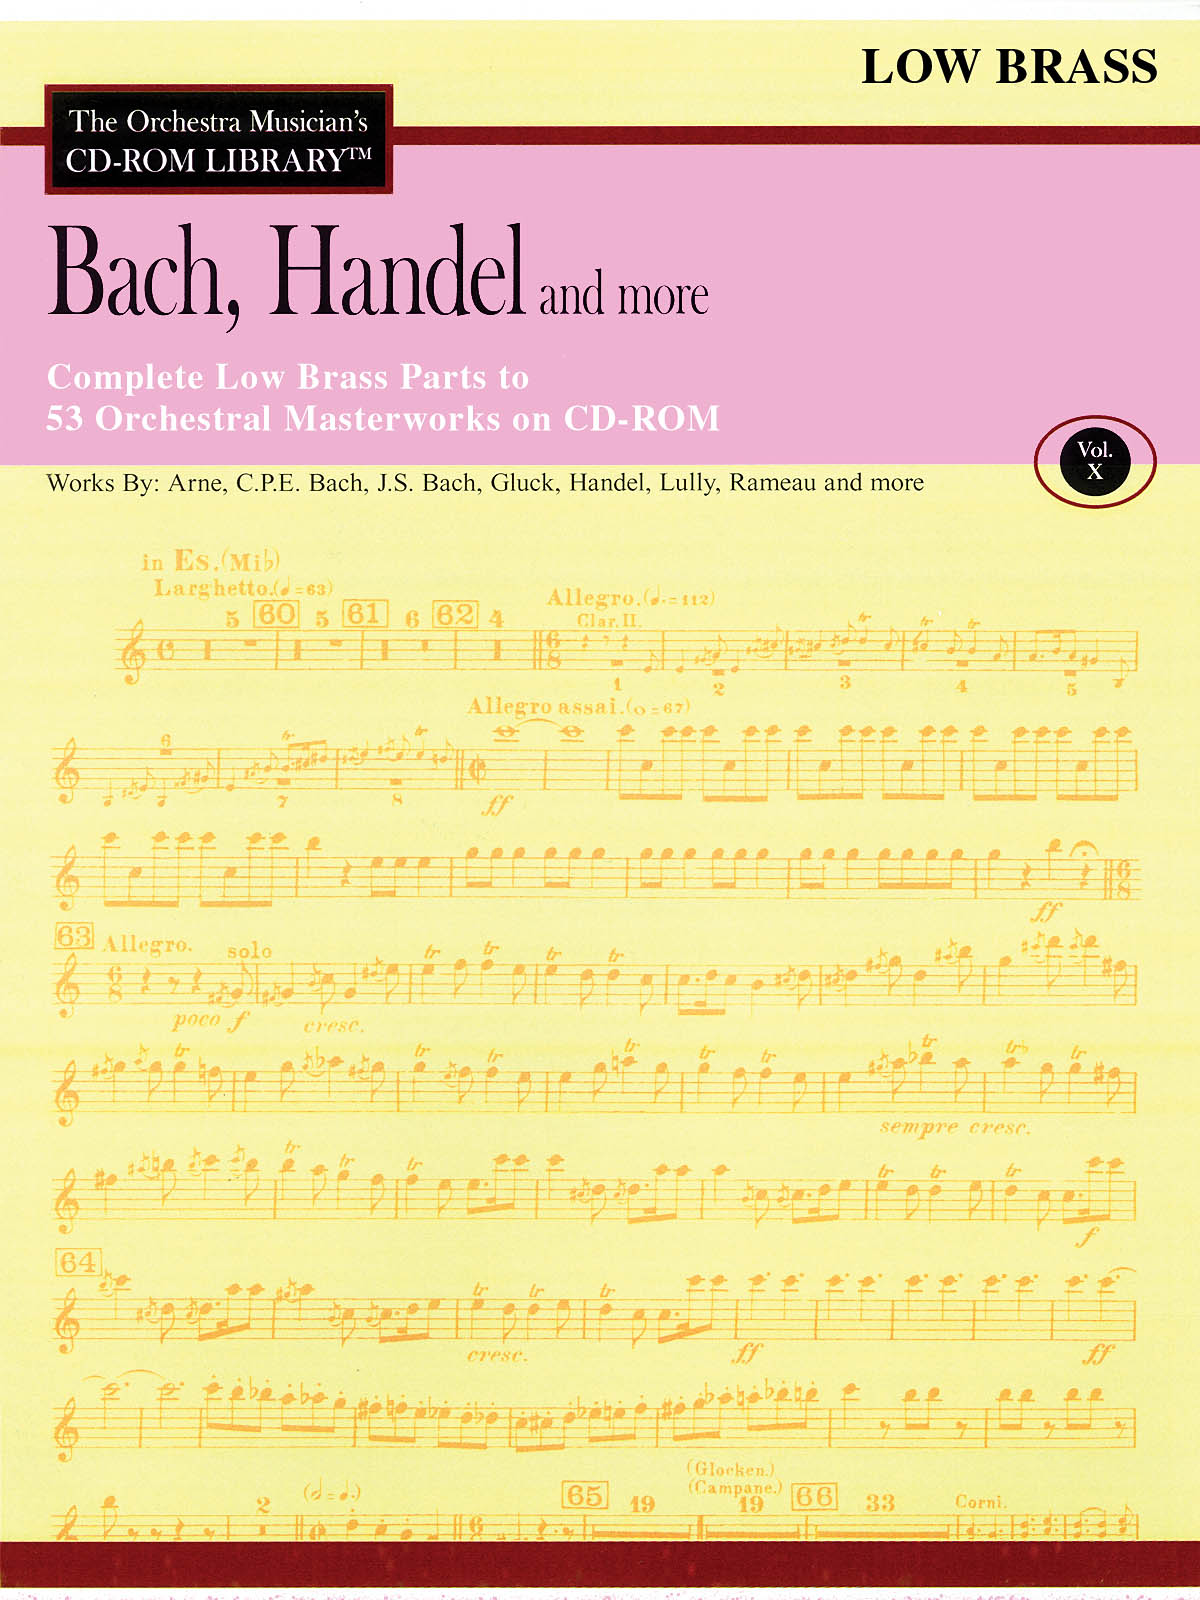 Bach, Handel and More - Volume 10(The Orchestra Musician's CD-ROM Library)